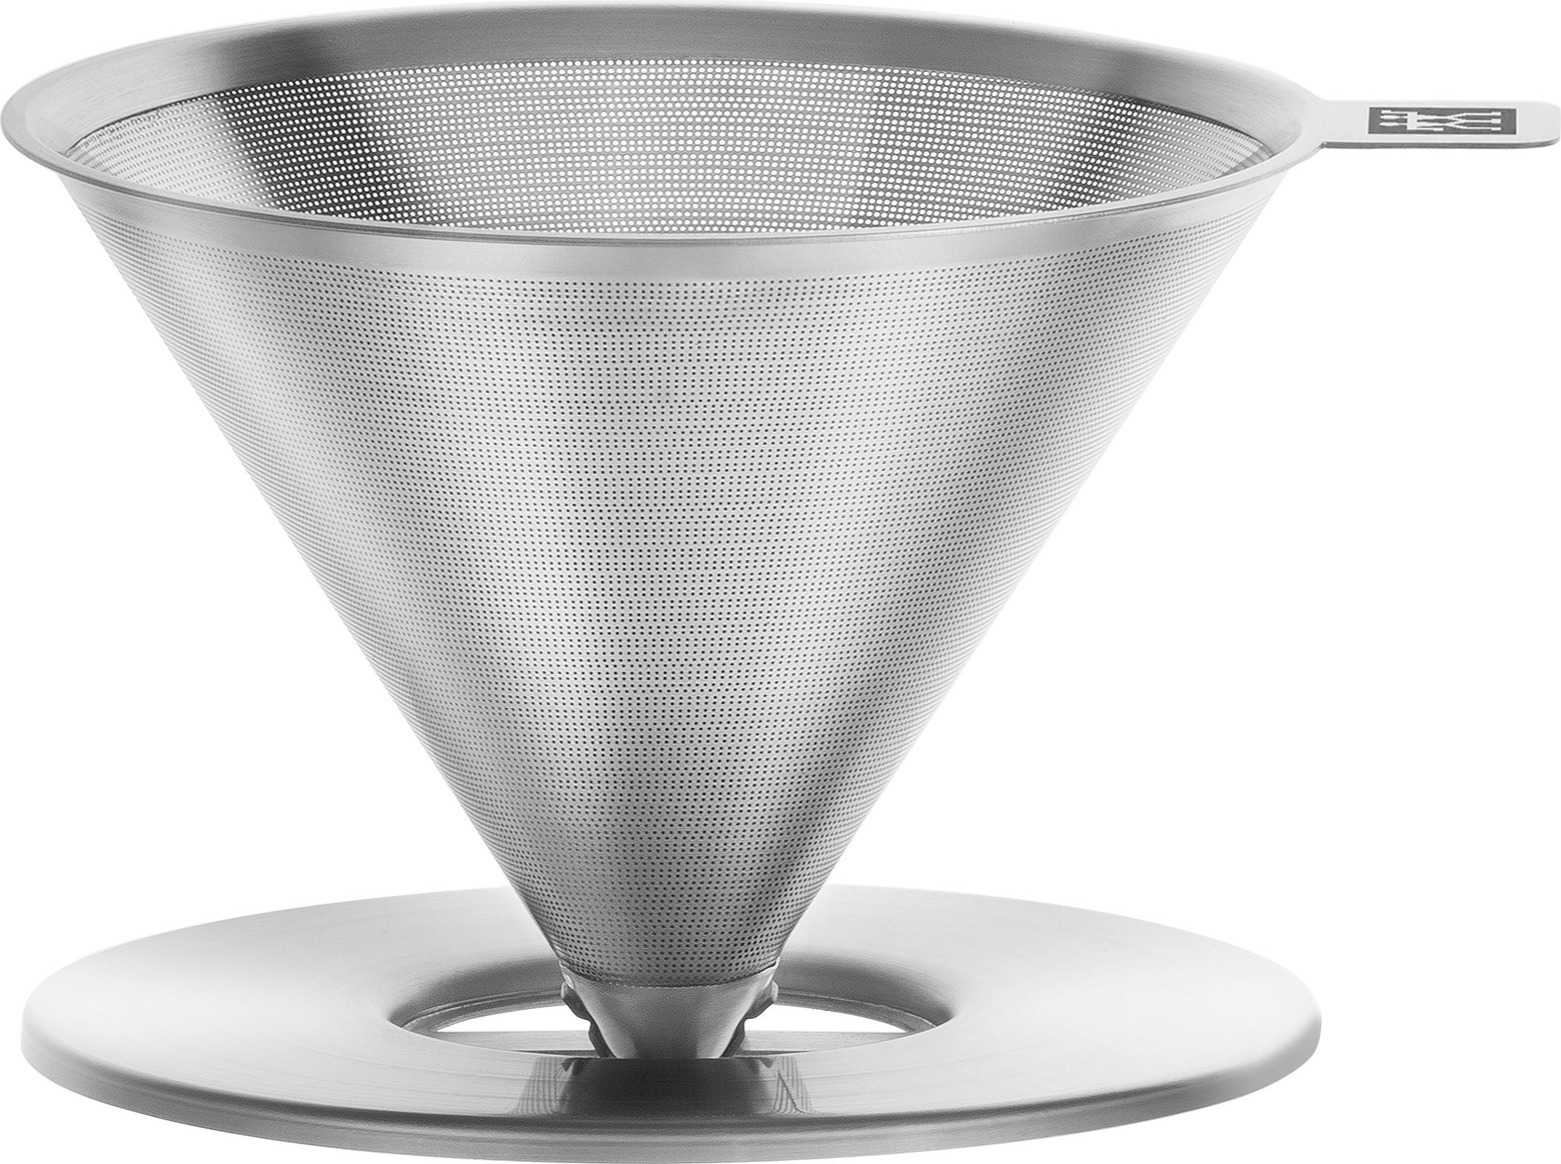 ZWILLING Sorrento Stainless Steel Pour Over Coffee Dripper 